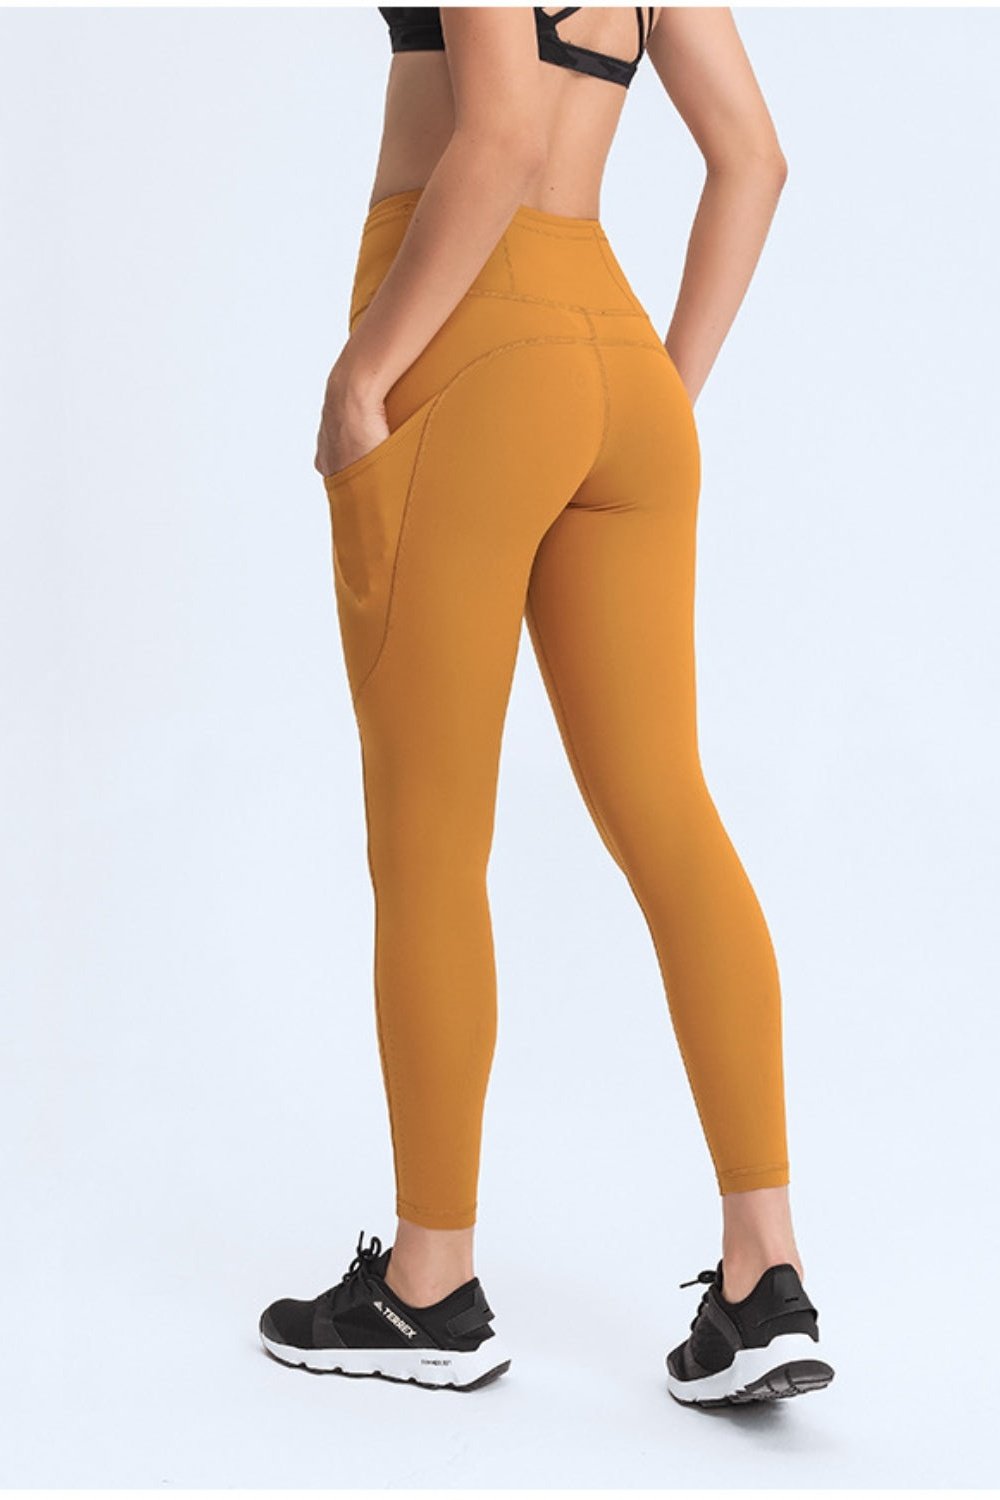 Wide Waistband Leggings with Pockets - Leggings - FITGGINS